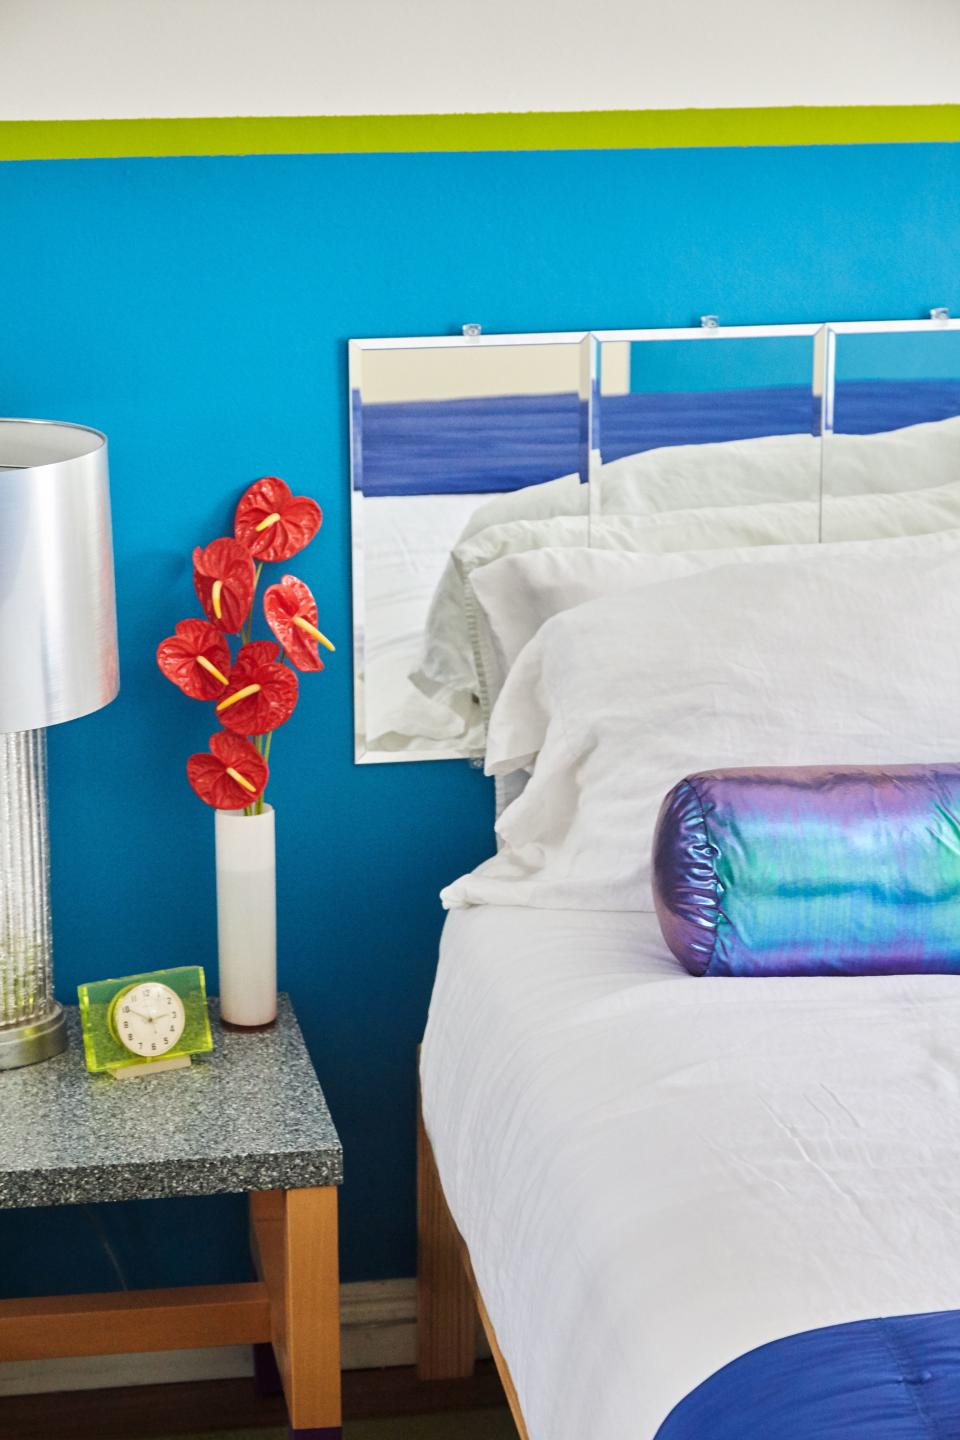 In Leah’s bedroom, a Soviet-era vintage green clock (an Etsy find) sits atop a Corian-topped bedside table (a Craiglist find), next to a headboard made of mirrors that she bought online and mounted on the wall. The only semi-splurge was the holographic bolster pillow, a custom piece.